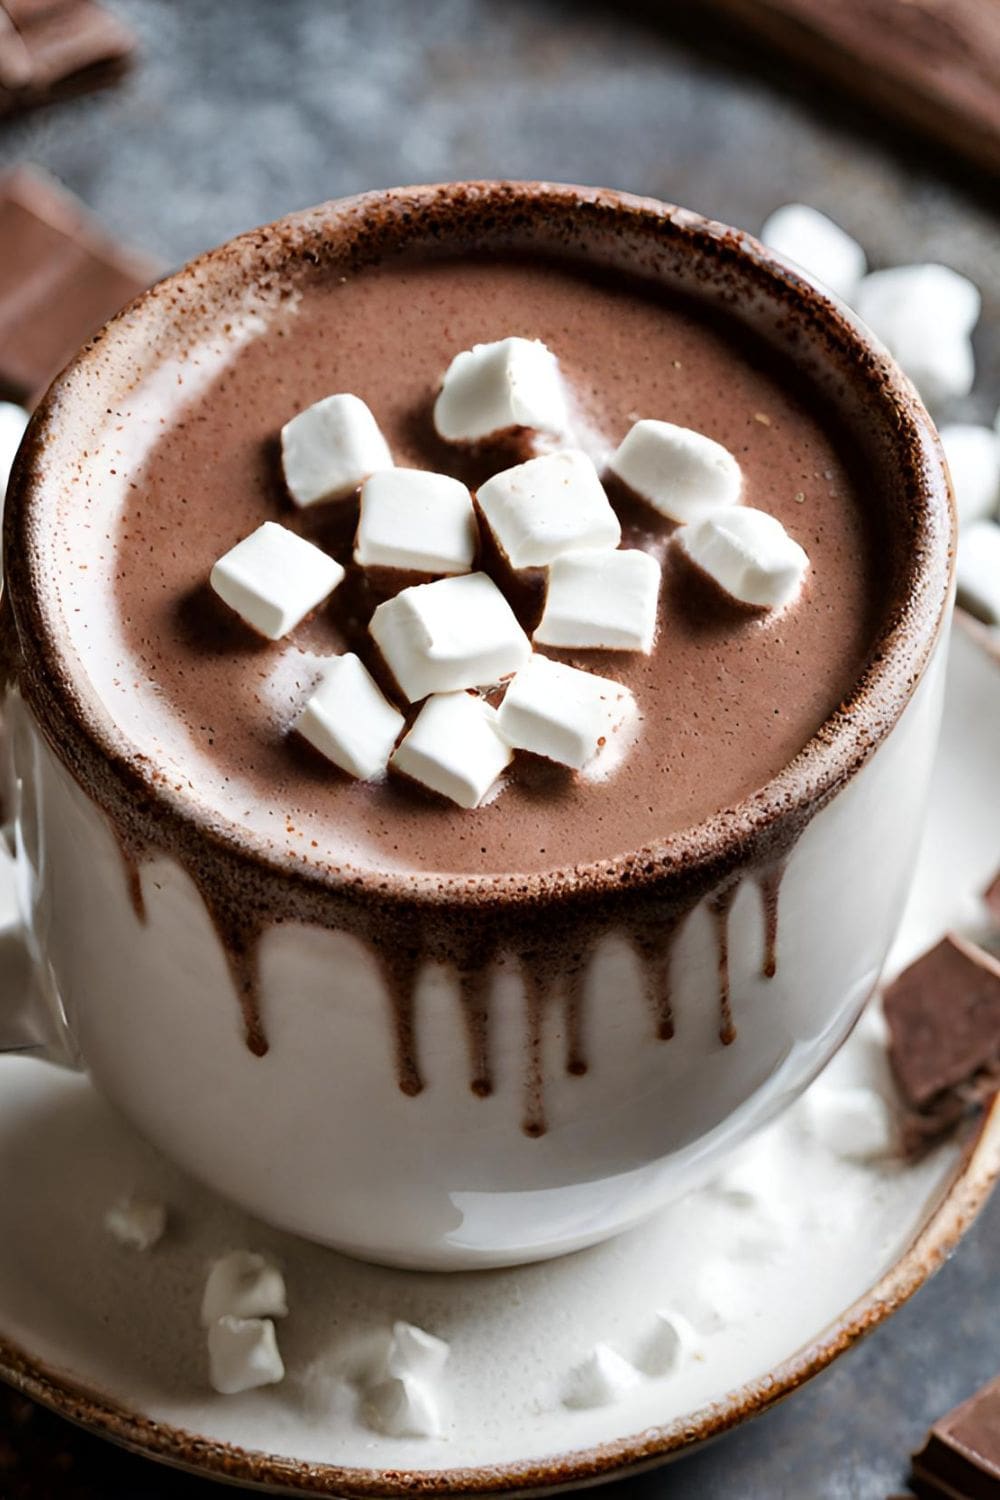 A close-up of a cup of hot chocolate with marshmallows on top.